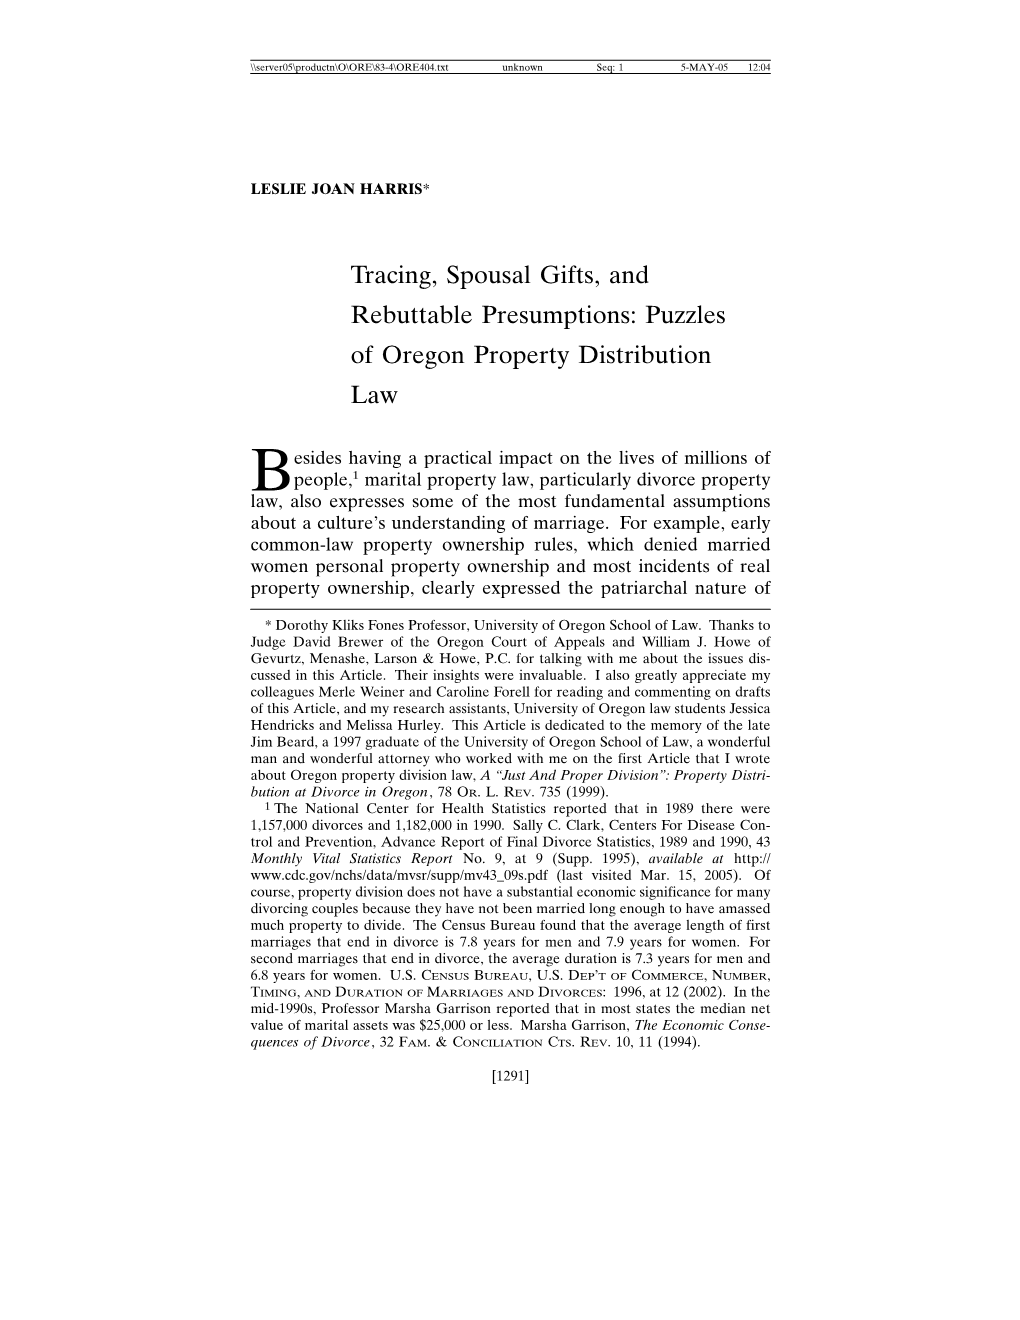 Tracing, Spousal Gifts, and Rebuttable Presumptions: Puzzles of Oregon Property Distribution Law